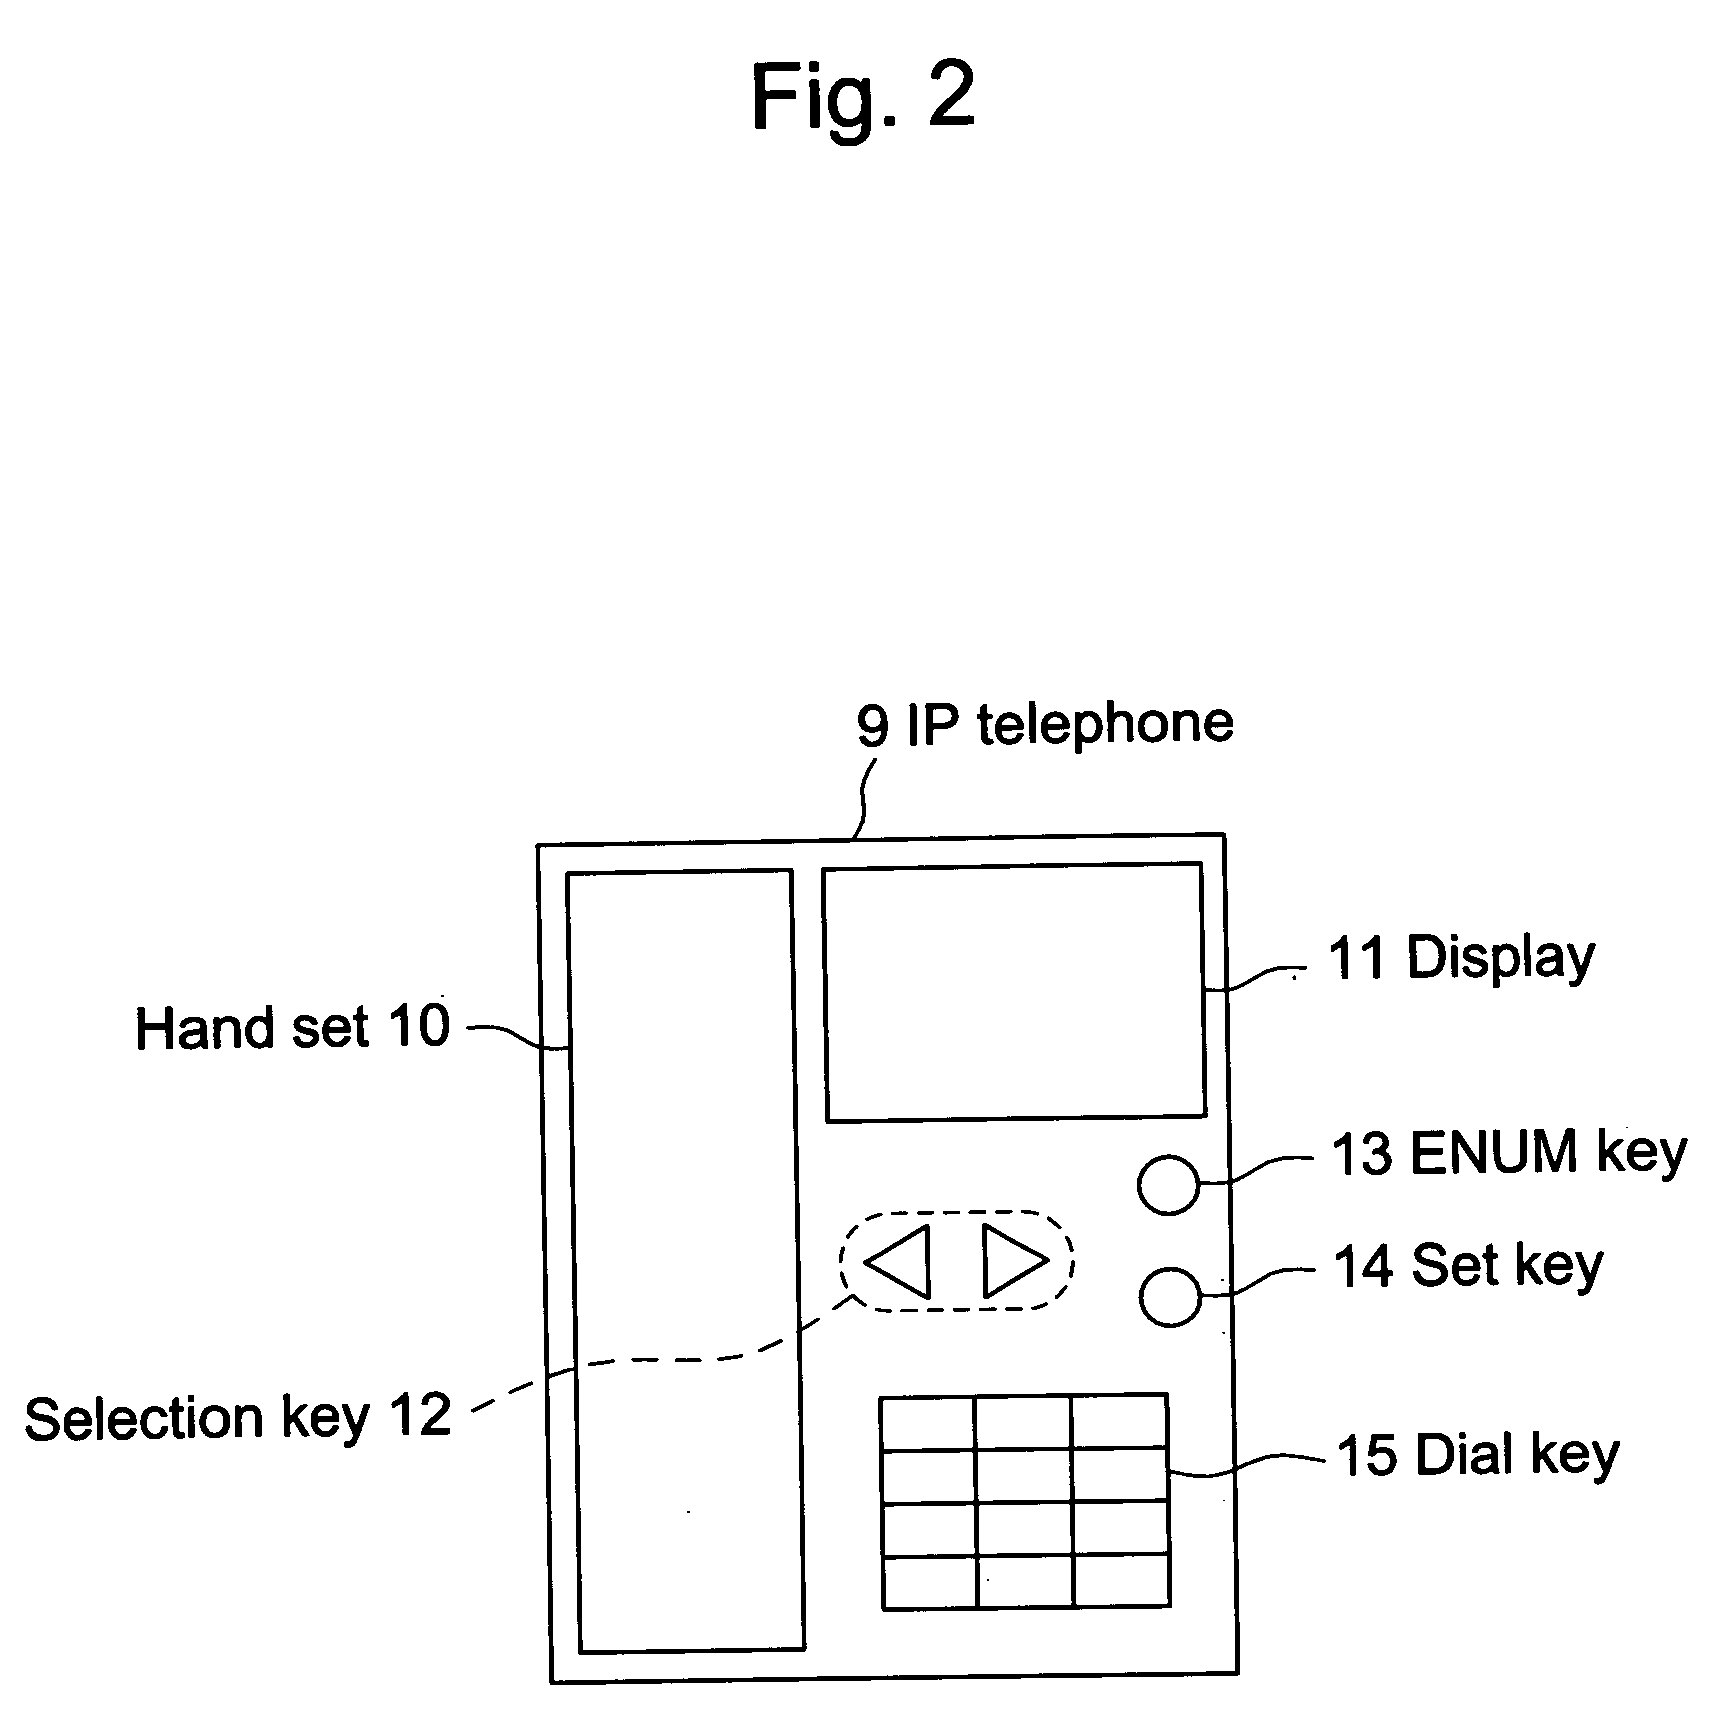 Communication apparatus and communication system